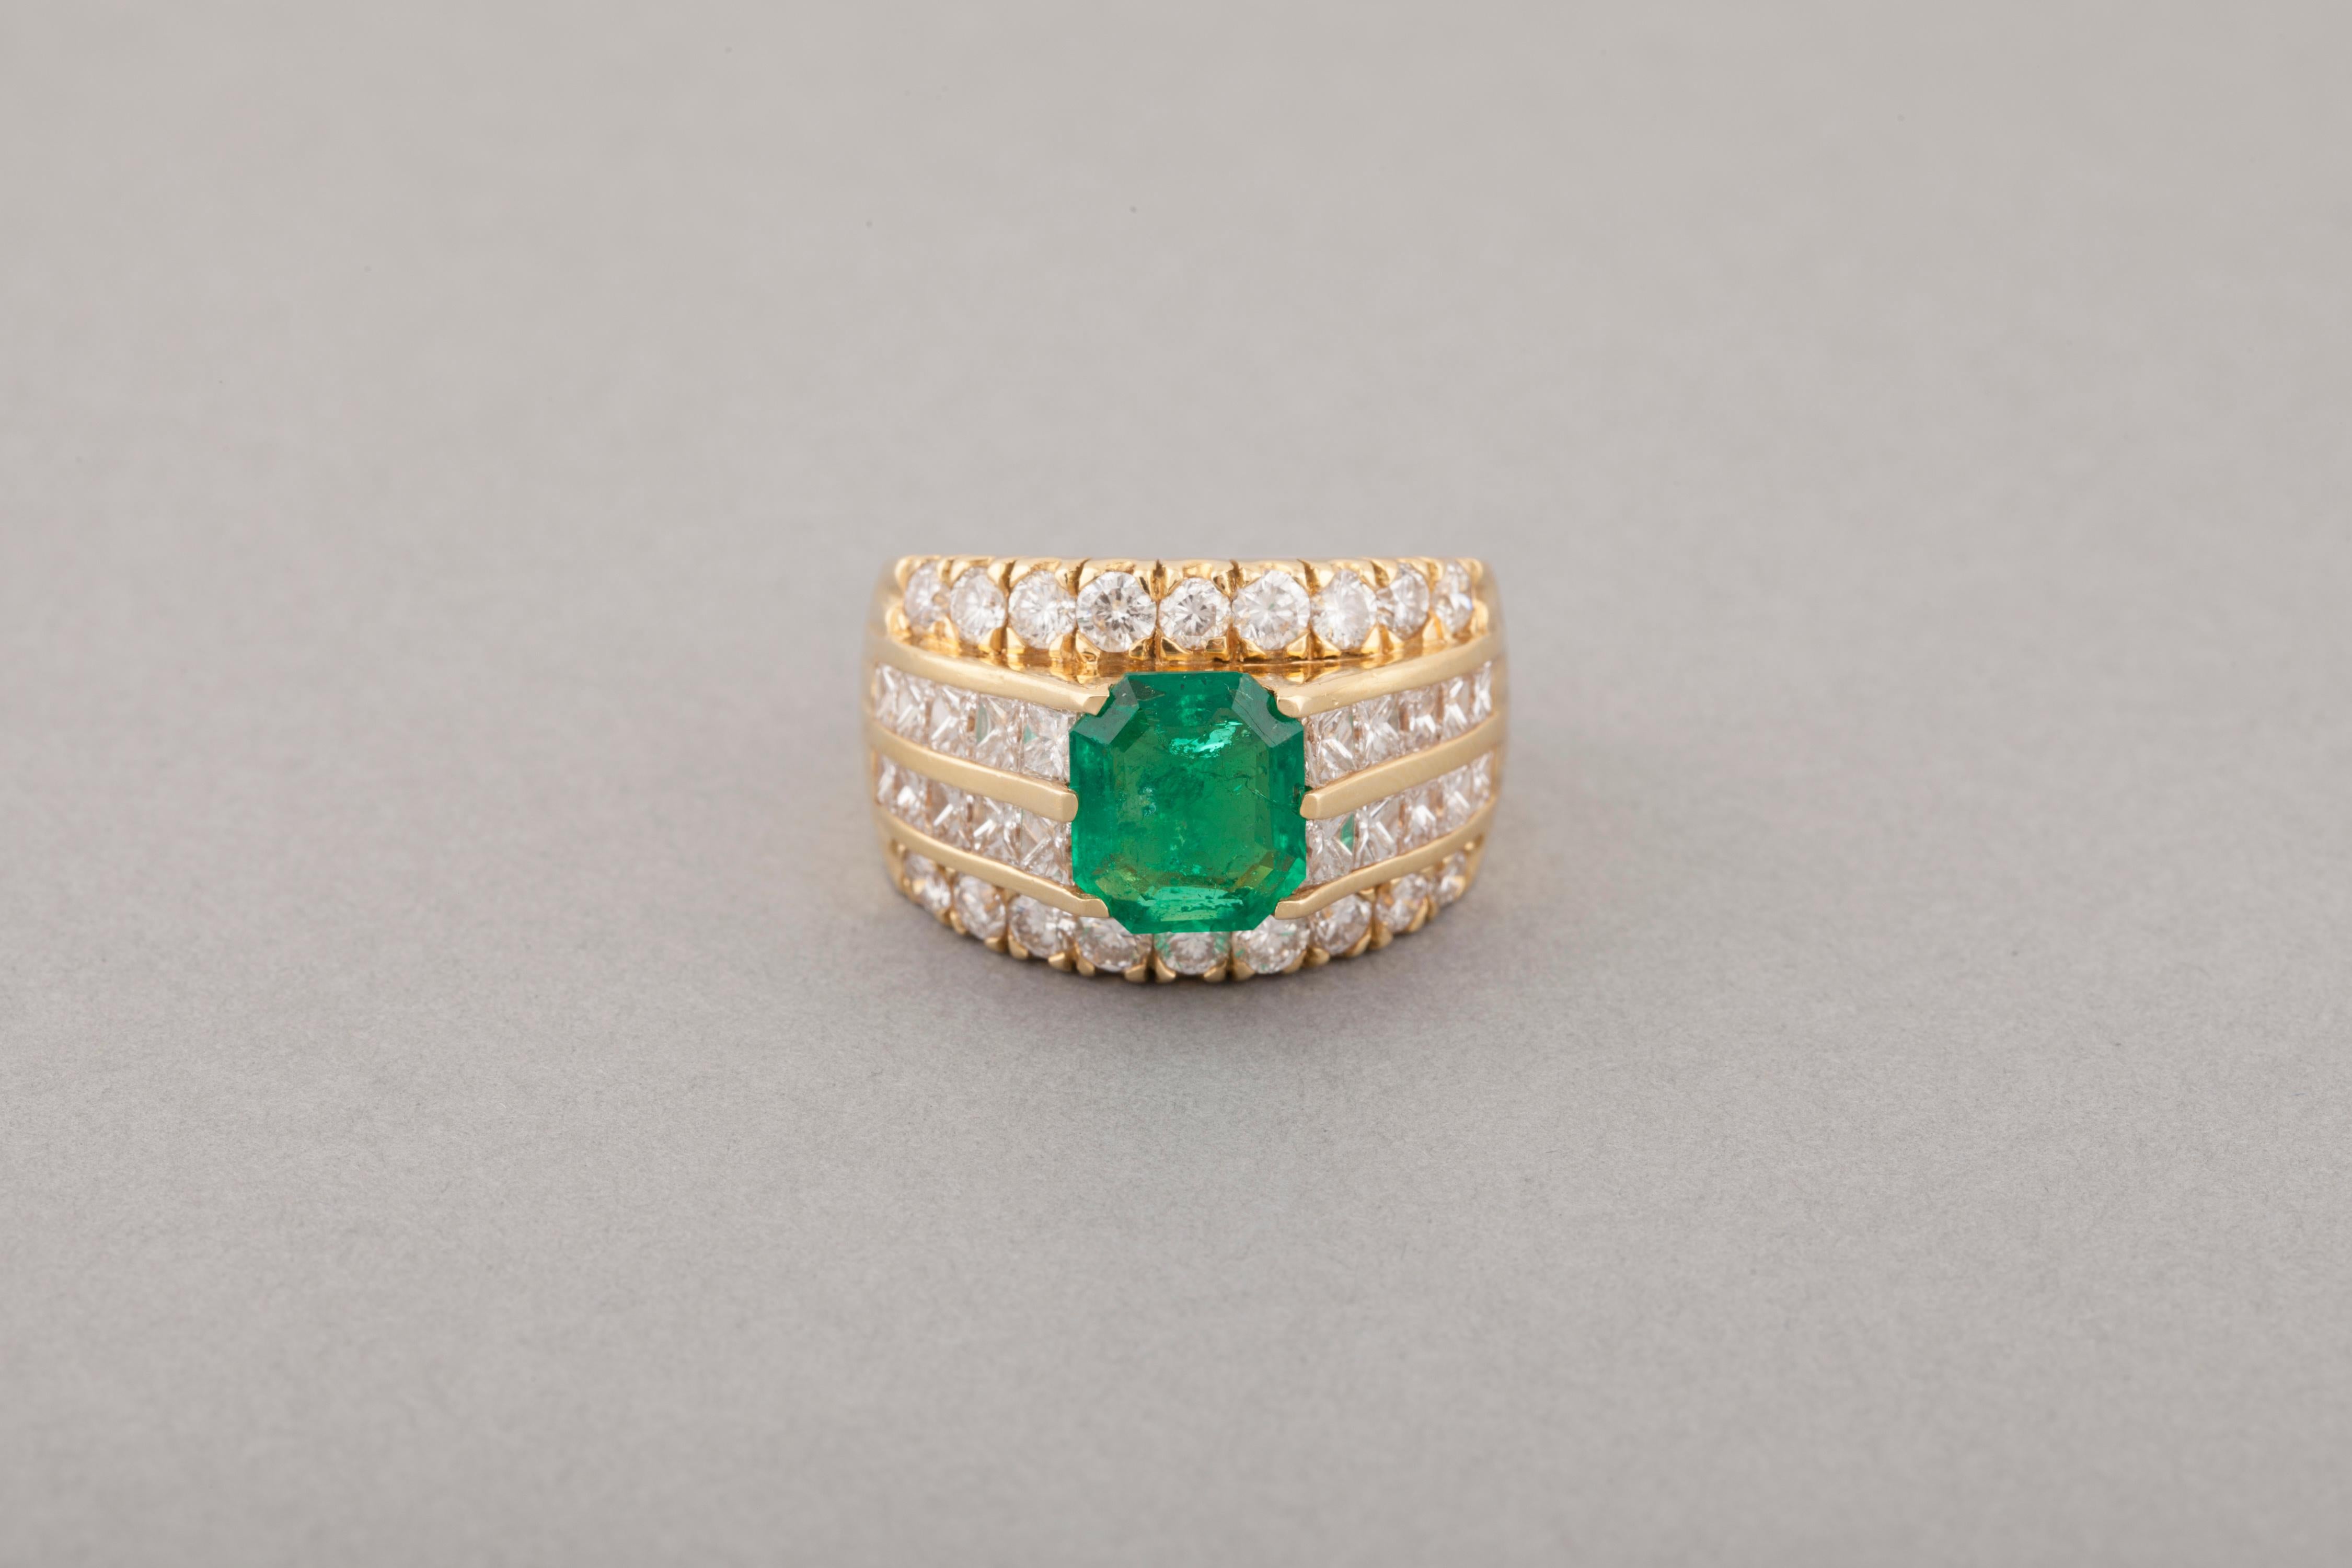 3.20 Carats Diamonds and 2 Carats Colombian Emerald French Ring

Very beautiful ring, made in France circa 1980.
Made in yellow gold 18k, diamonds and one Colombian Emerald.
Hallmark for gold 18k (the eagle head).
The diamonds cut are round